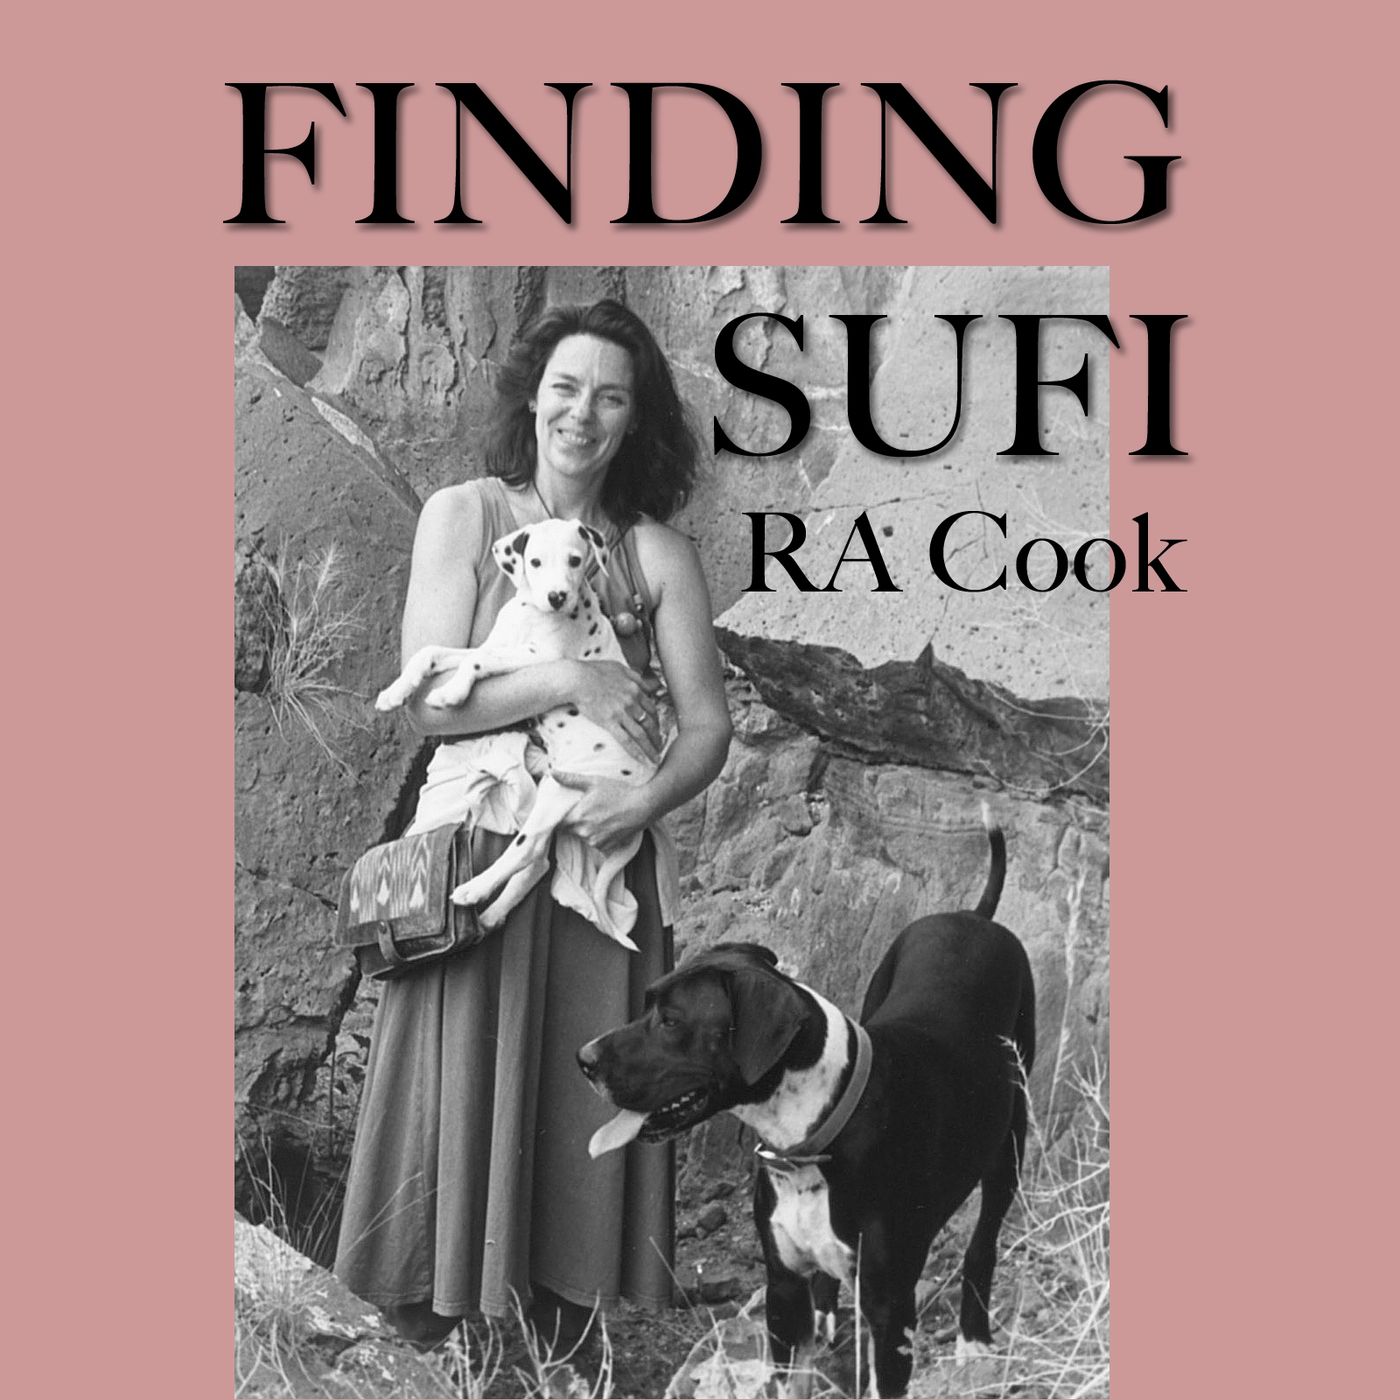 Finding Sufi_RA Cook